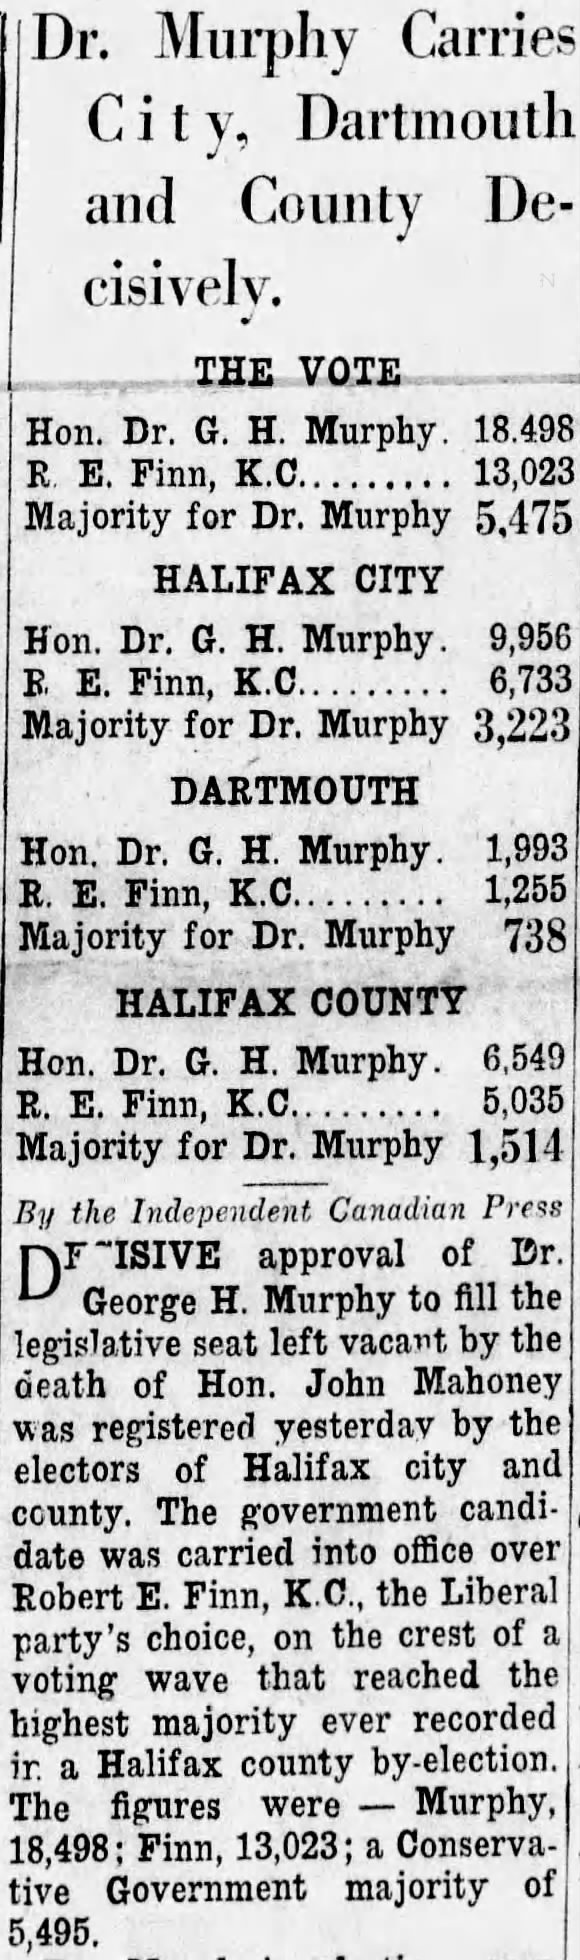 Dr. Murphy Carries City, Dartmouth and County Decisively